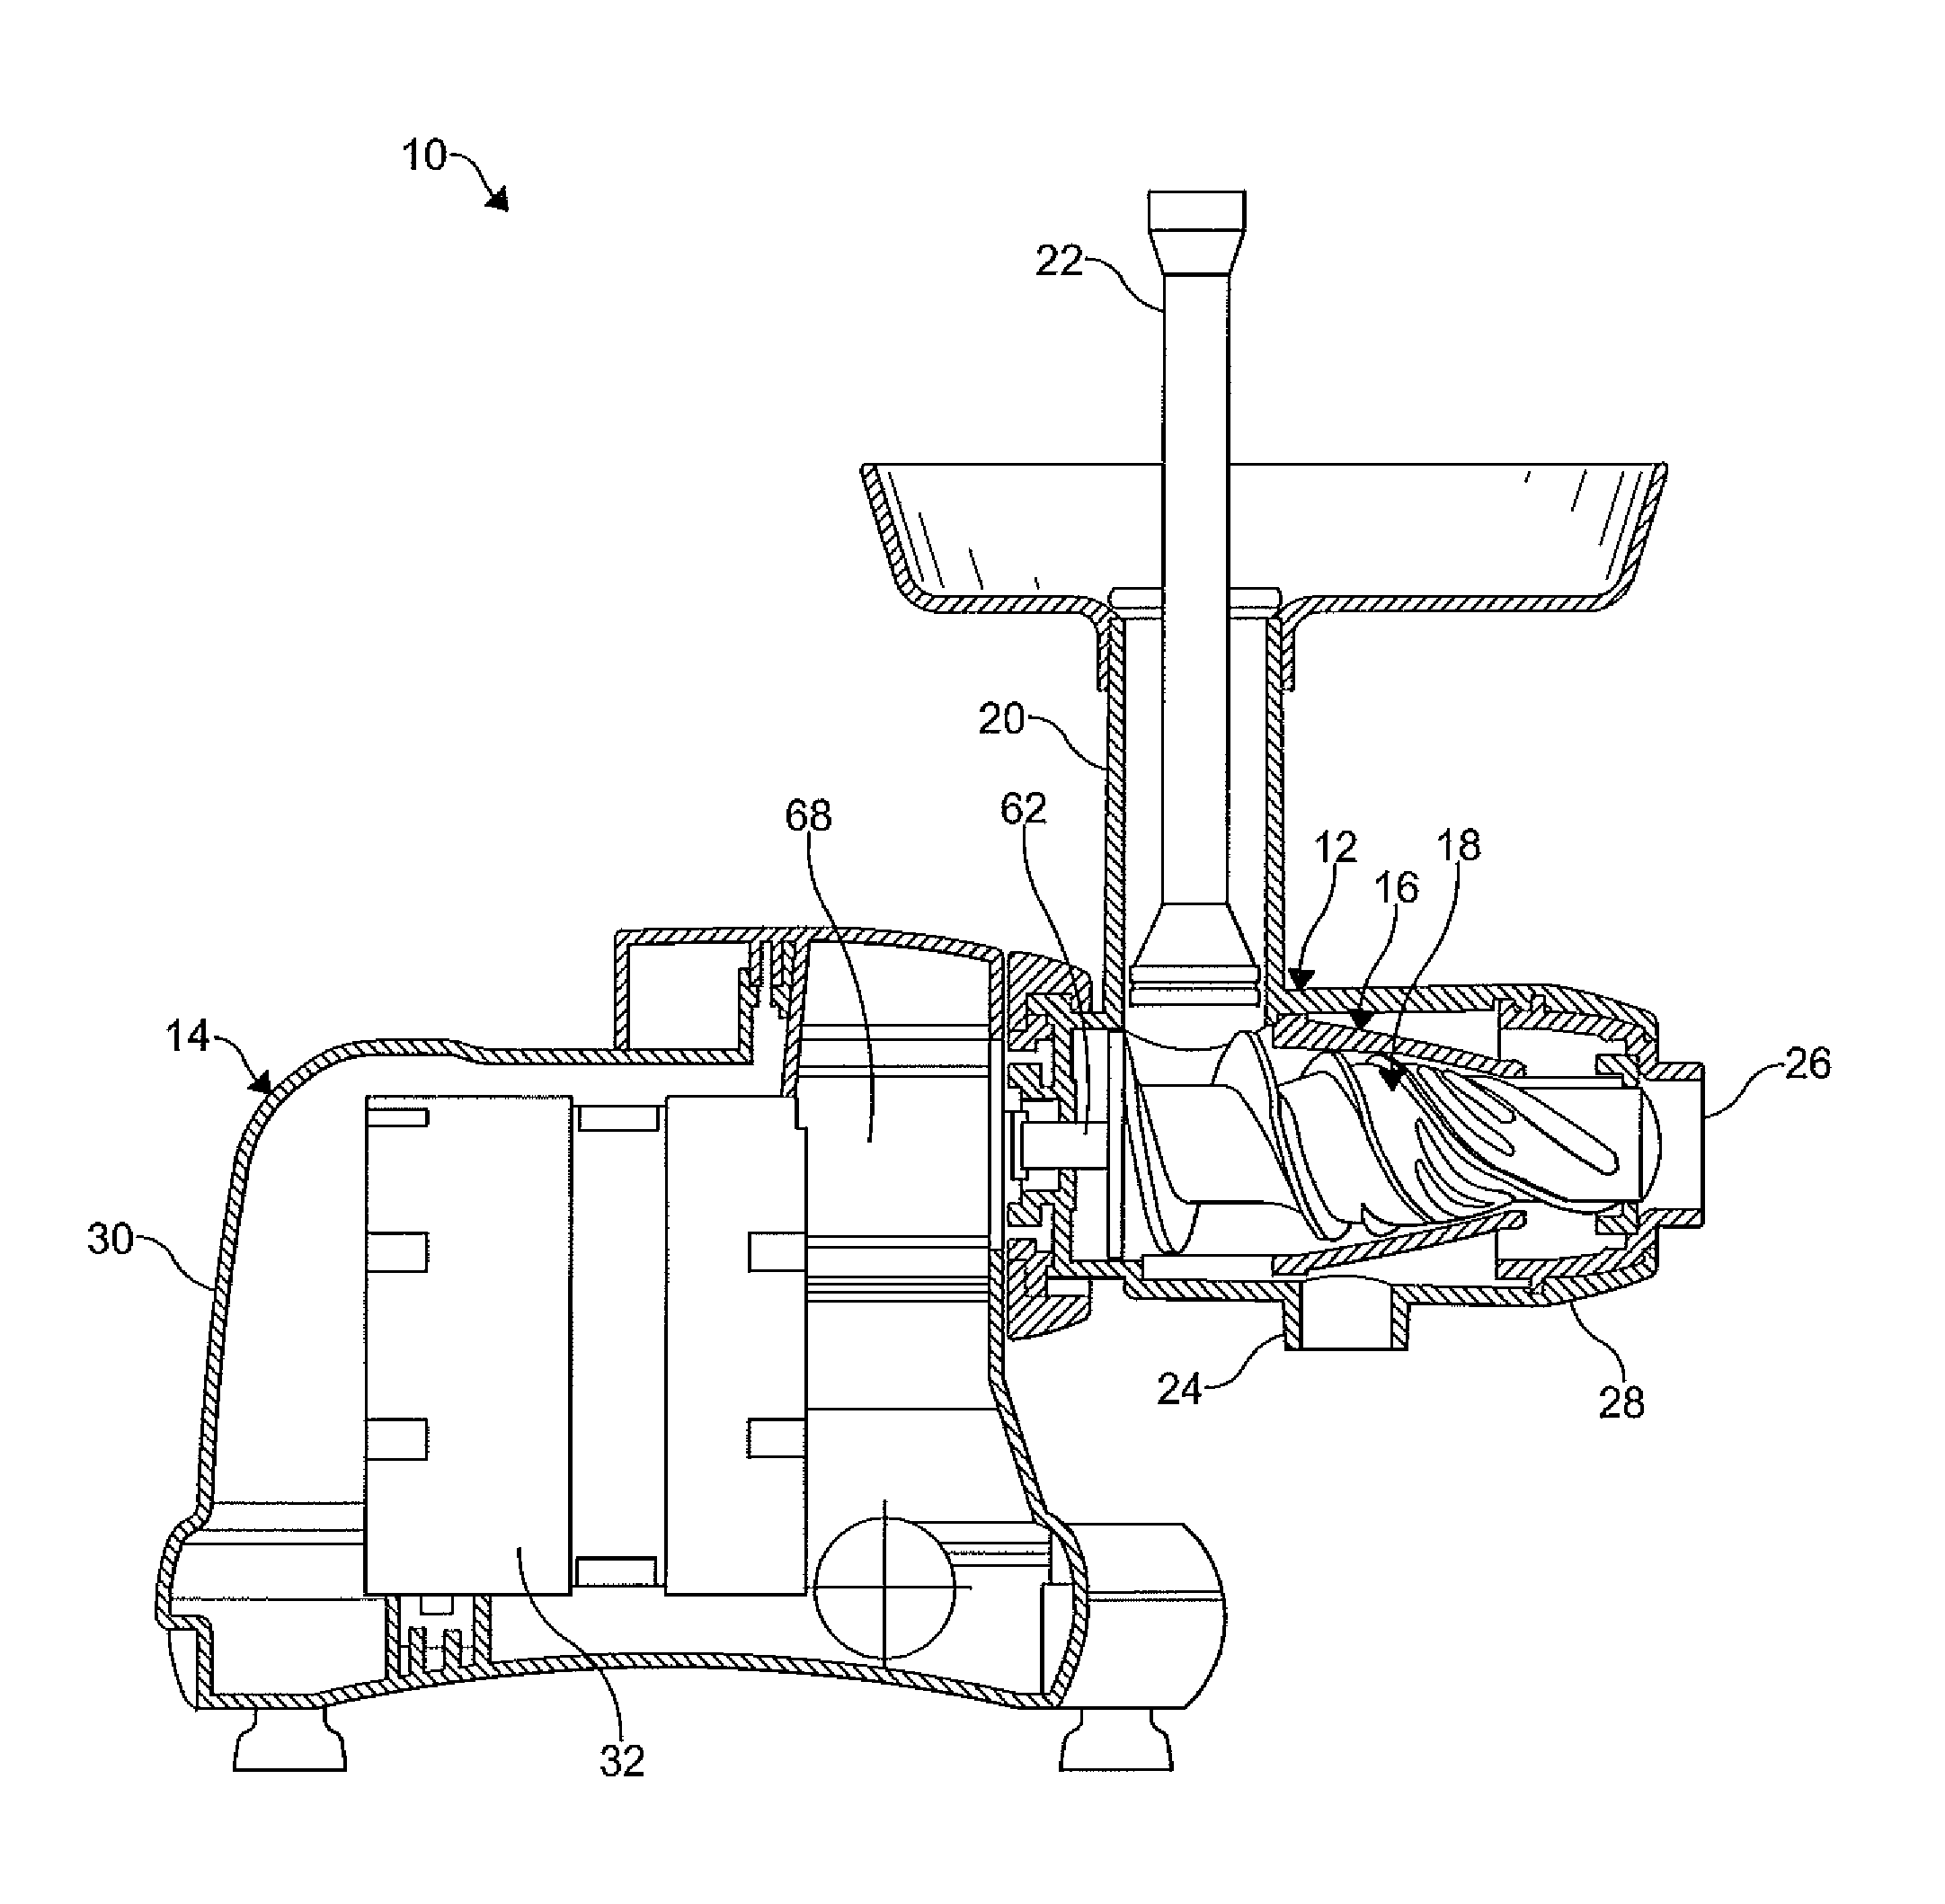 Horizontal juicer with compression strainer device